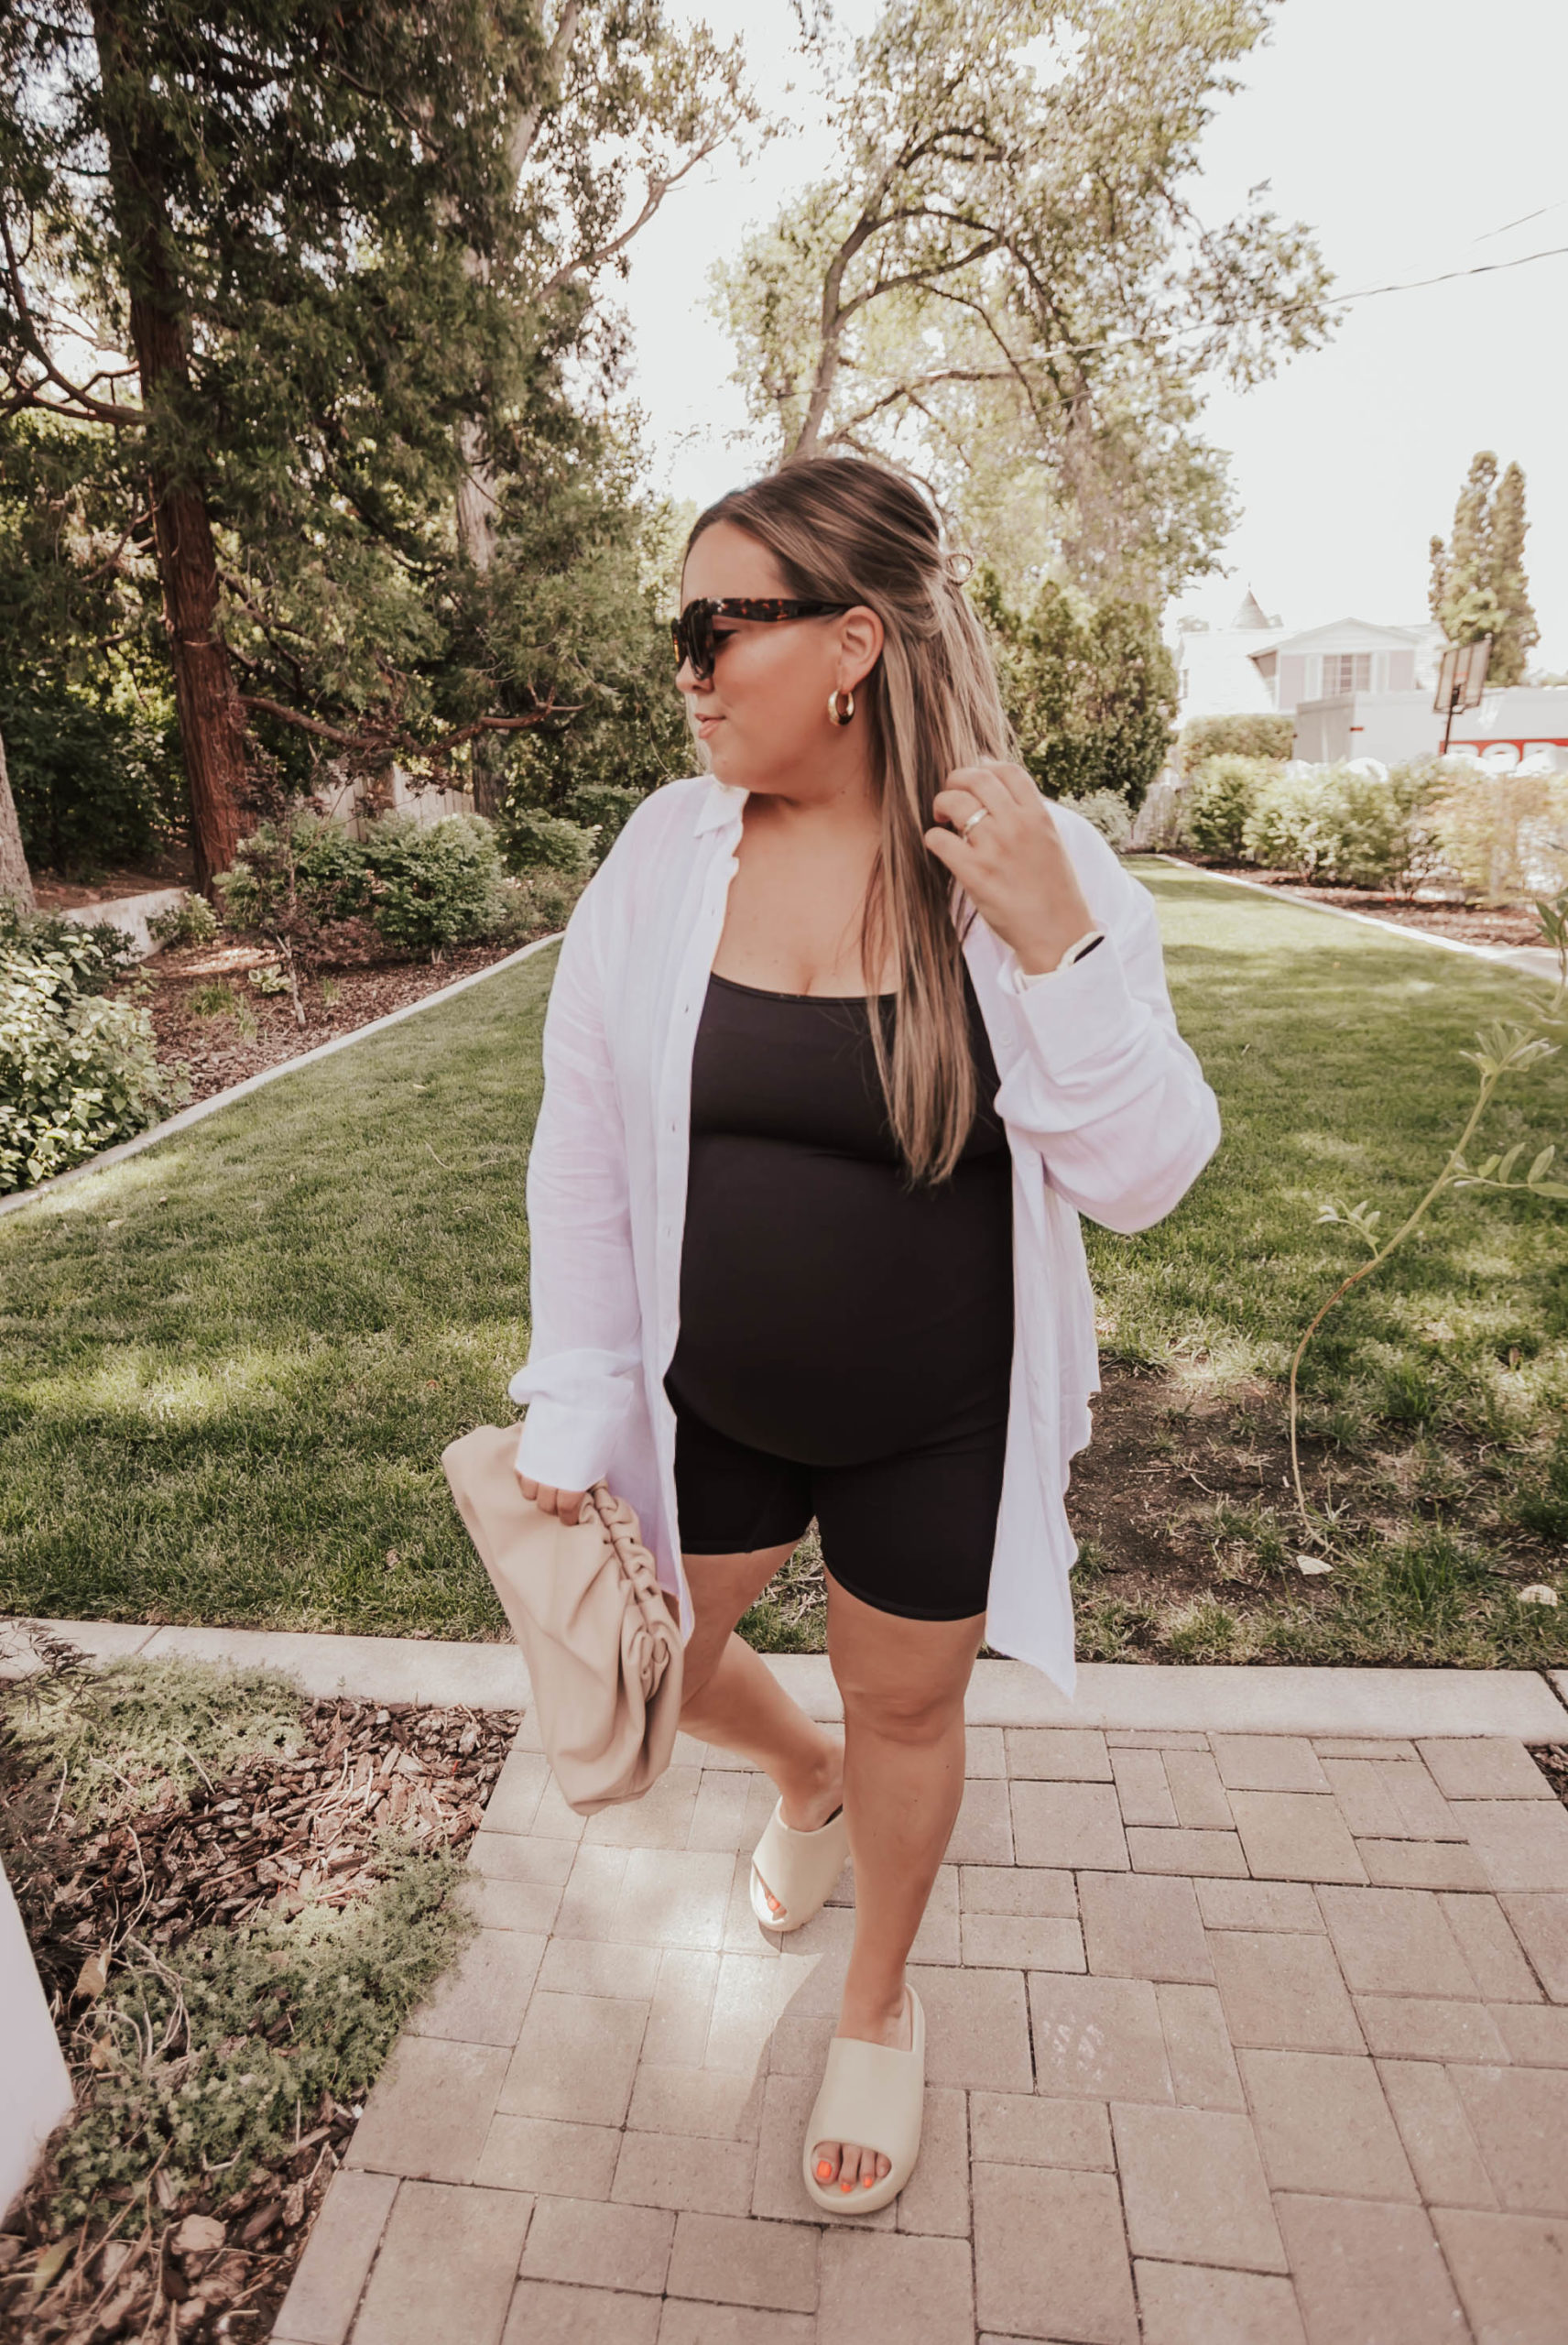 Reno blogger, Ashley Zeal Hurd, from The Ashley and Emily Blog shares her August Amazon Favs - everything she bought this month!